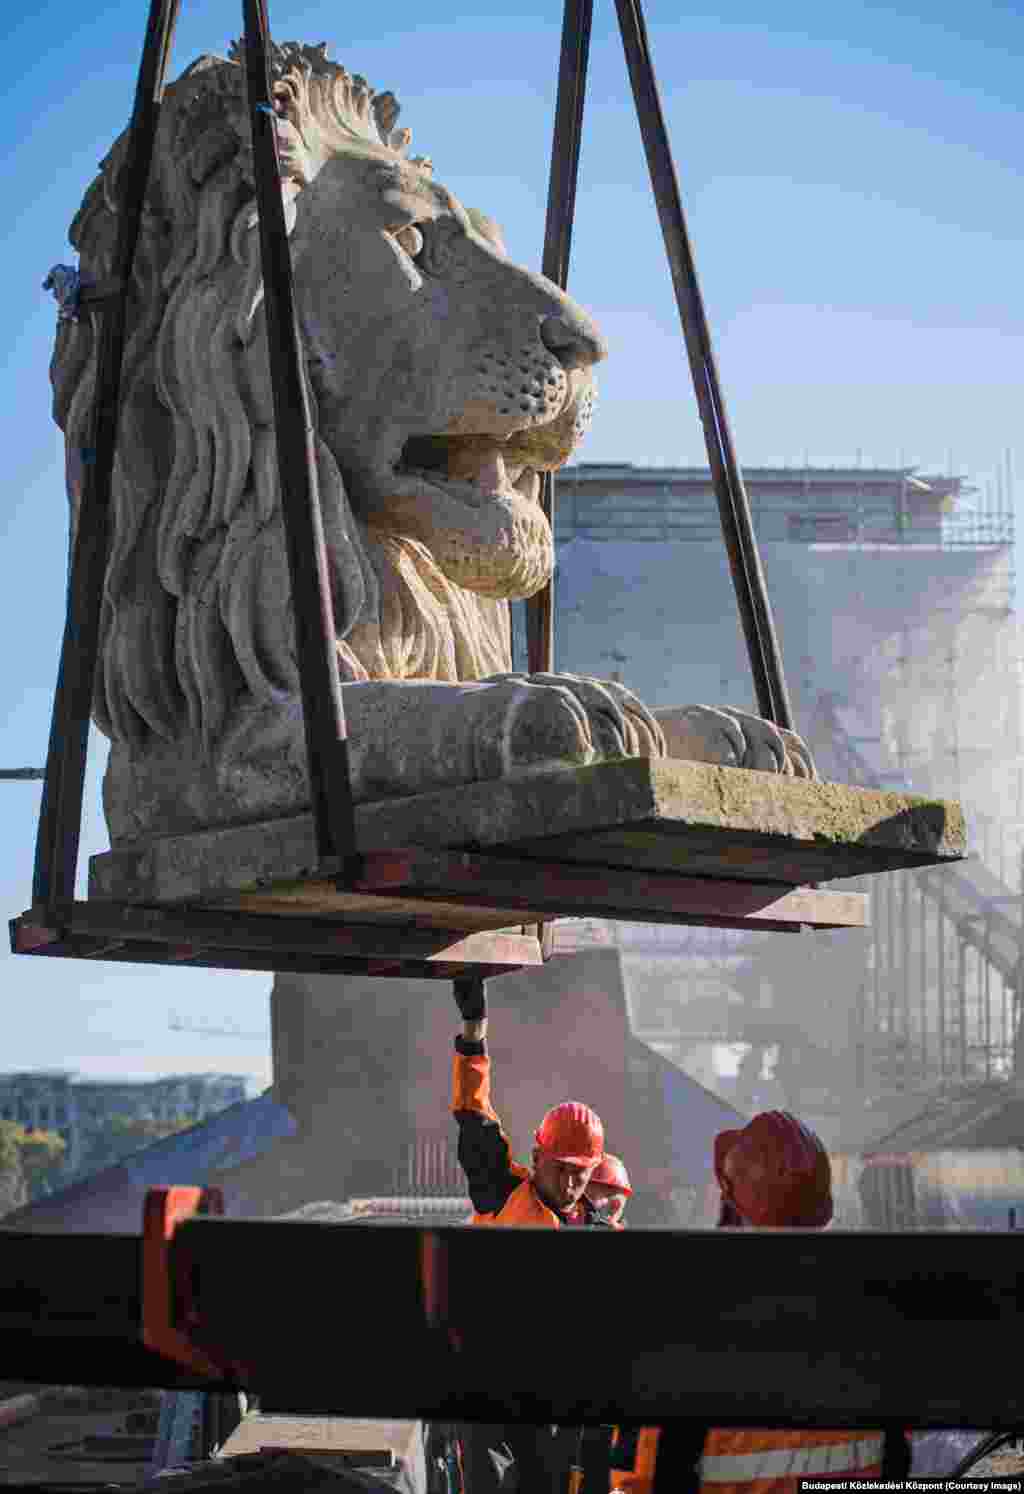 This photo and several other images released on October 18 on the Facebook page of BKK -- the Budapest Transport Center -- showed the piece-by-piece return of historic stone lions to their plinths at the four corners of Budapest&rsquo;s Szechenyi Chain Bridge. &nbsp;